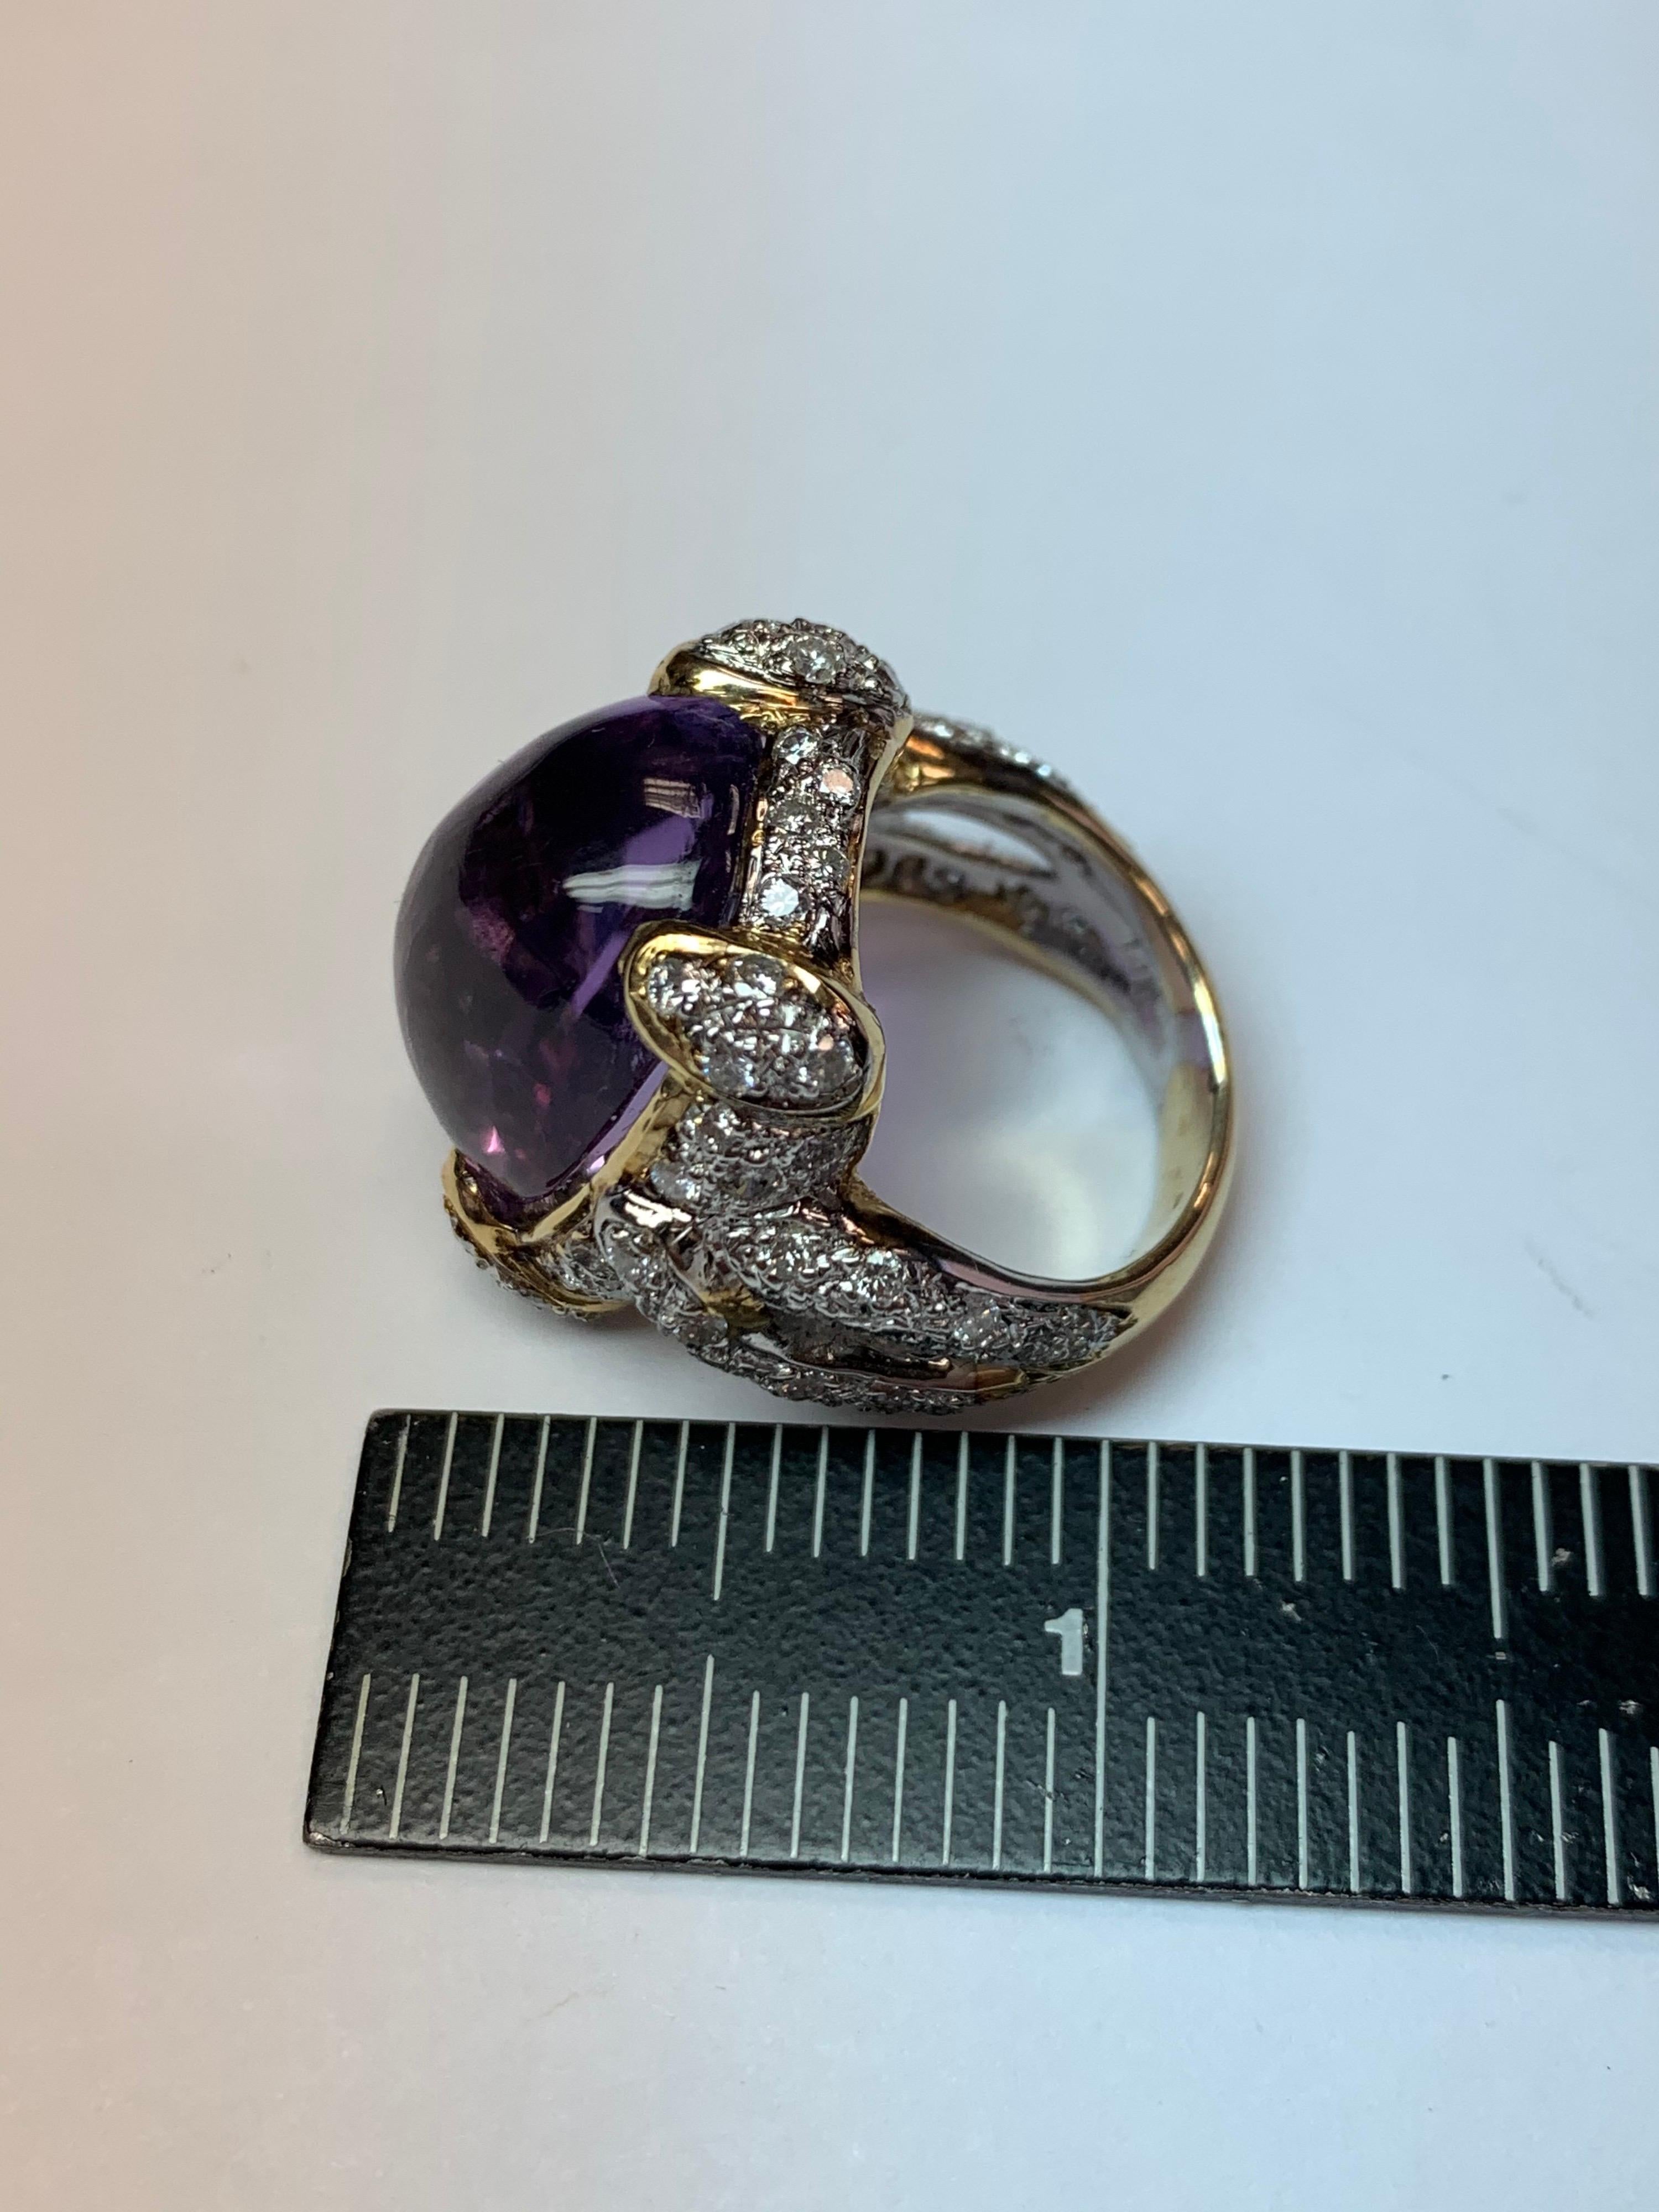 21.68 Carat Retro Gold Cocktail Ring Natural Diamond and Cab Amethyst circa 1960 For Sale 4